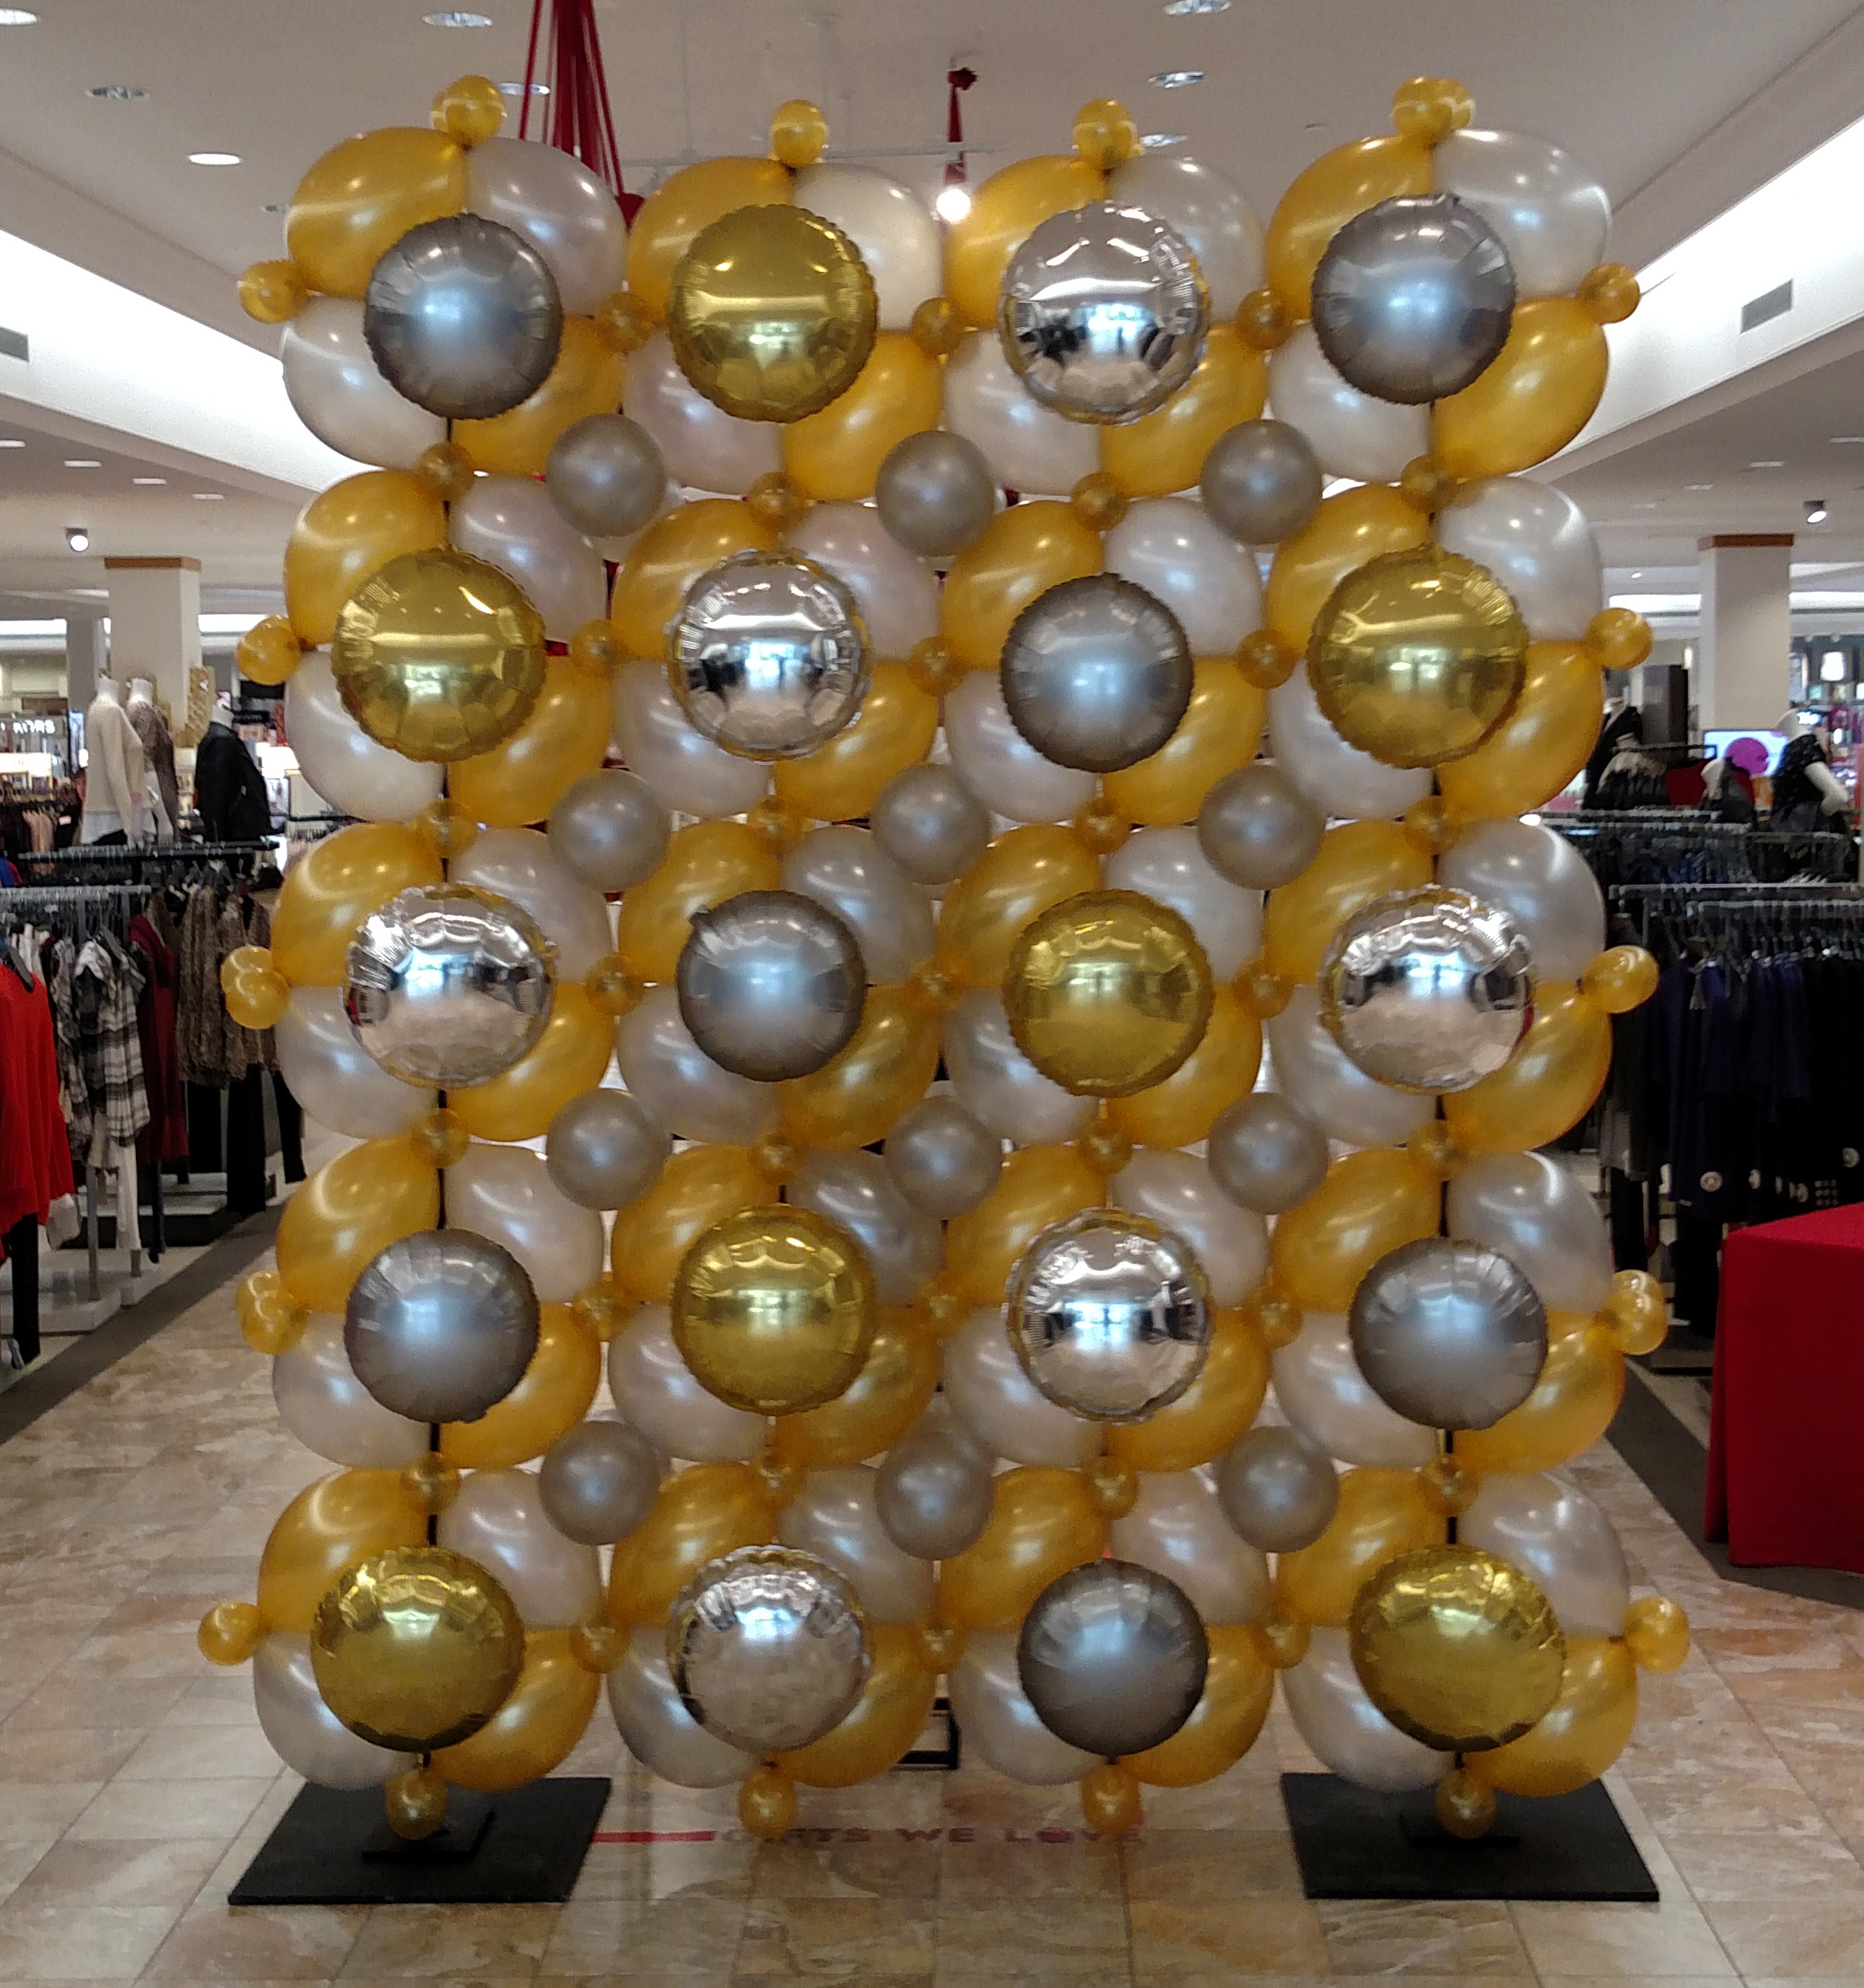 Macy's Silver, Gold, and Platinum Balloon Wall